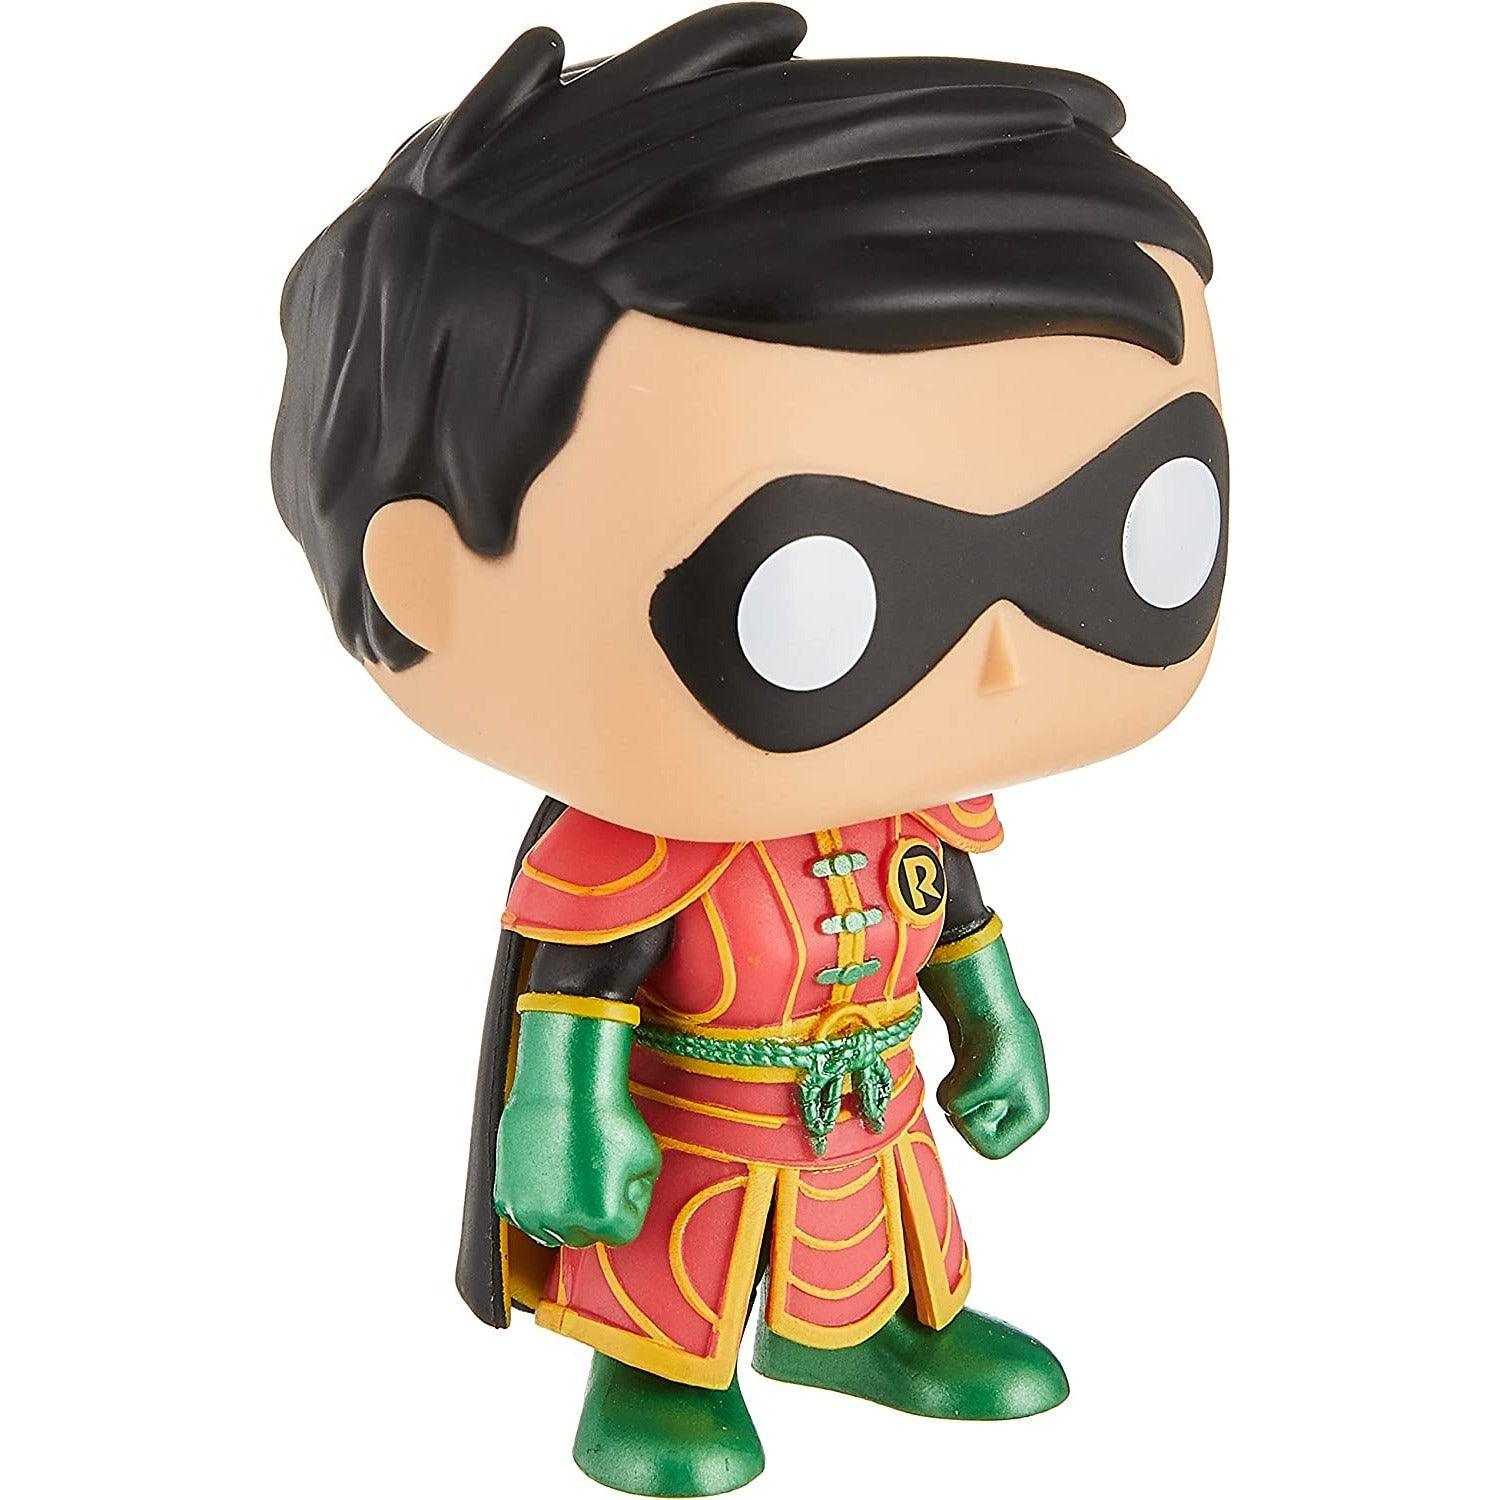 Funko Pop! DC Comic Imperial Palace Robin - BumbleToys - 18+, Action Figures, Boys, Characters, DC Comics, Disney, Funko, Girls, Pre-Order